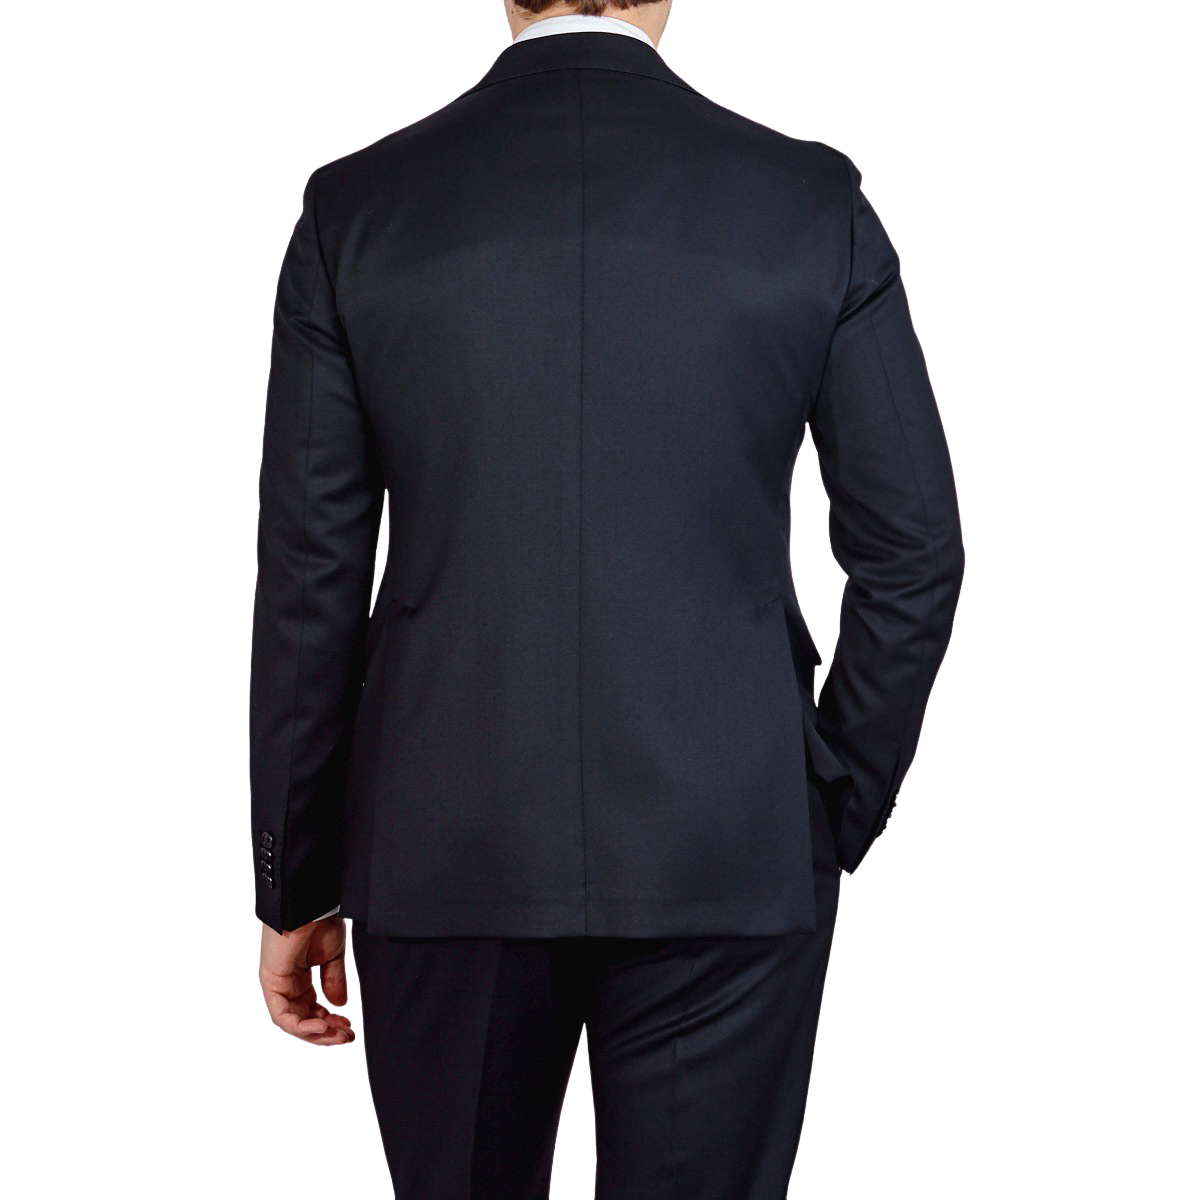 Top 10 Signs You're in a Poor-Fitting Suit – The Helm Clothing